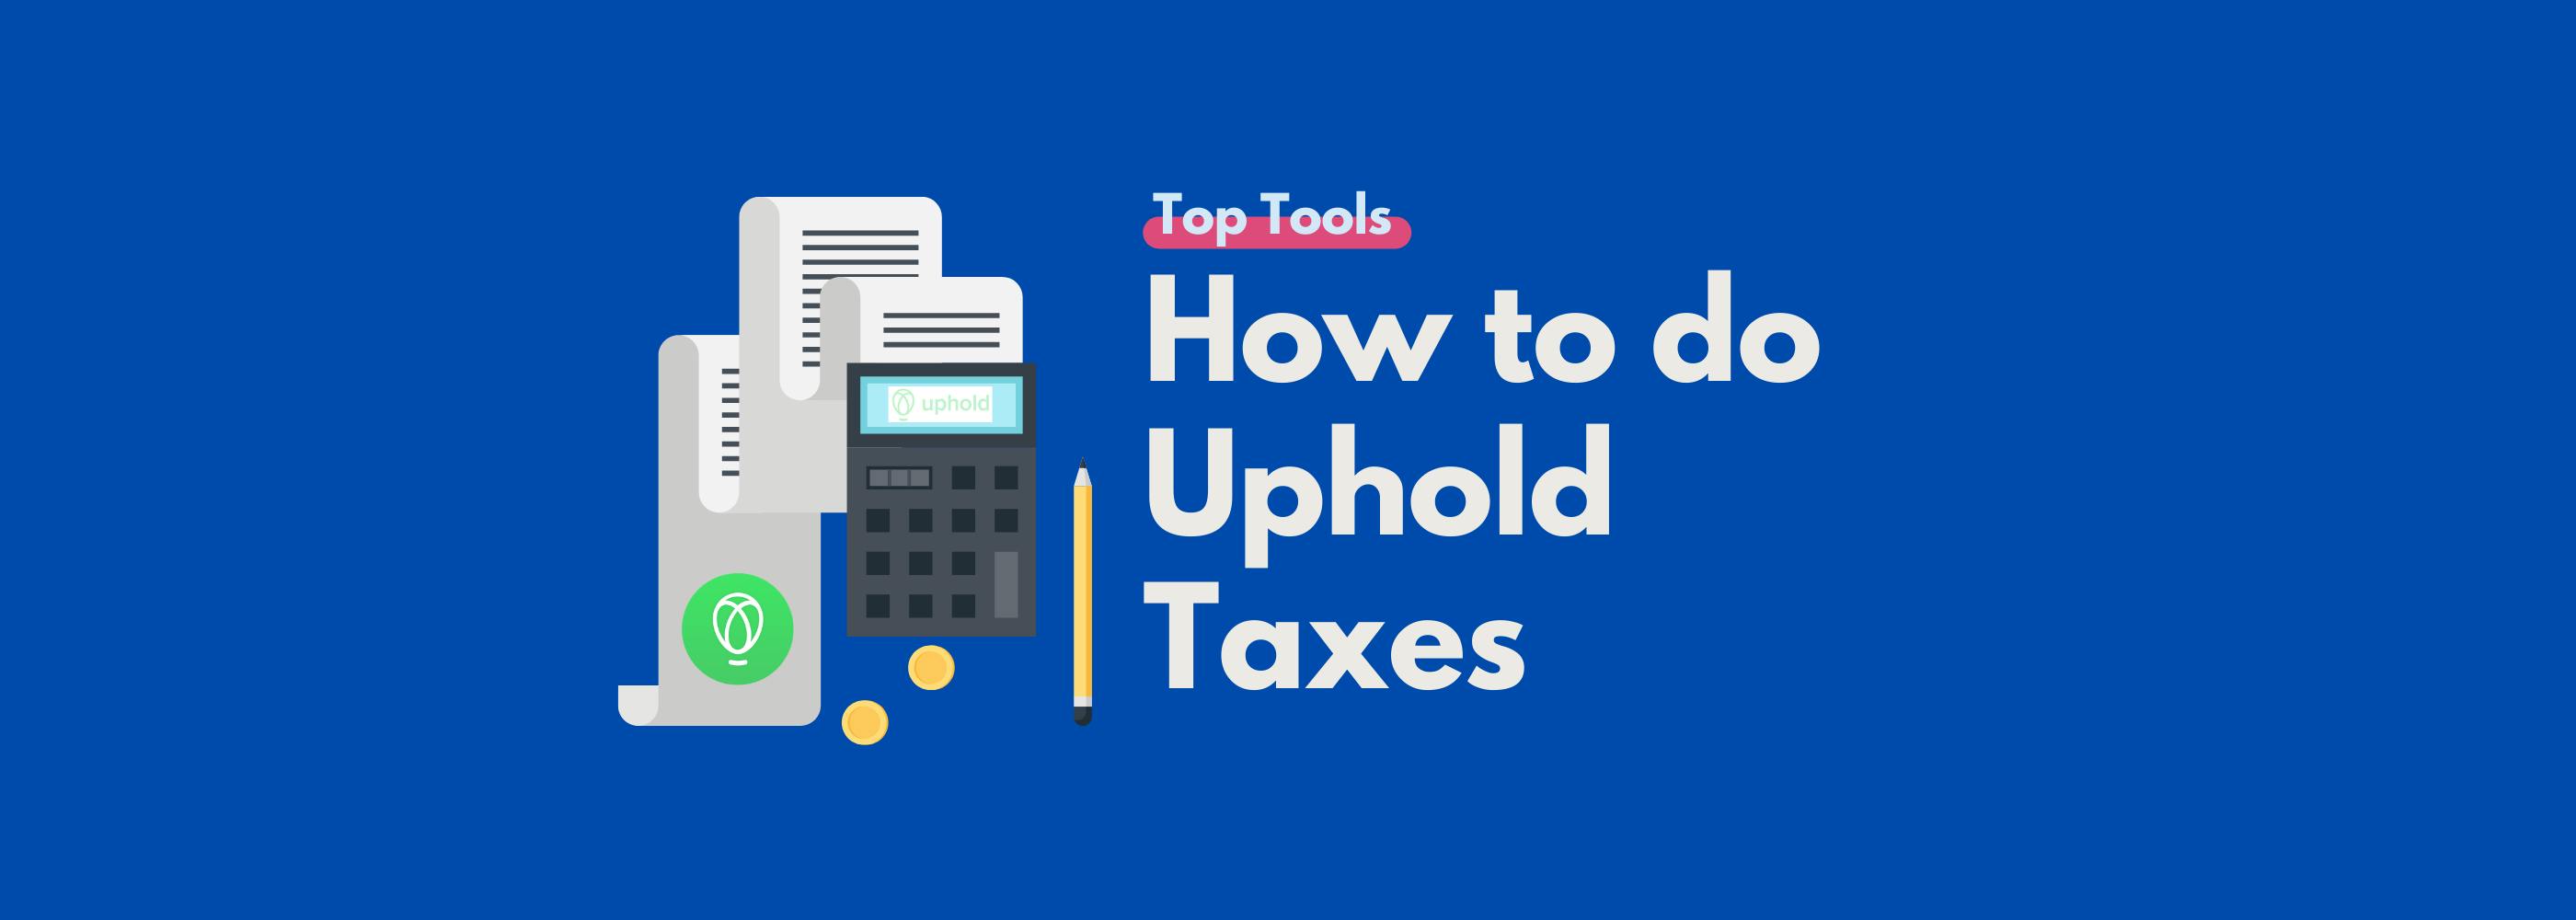 How to do Uphold Taxes